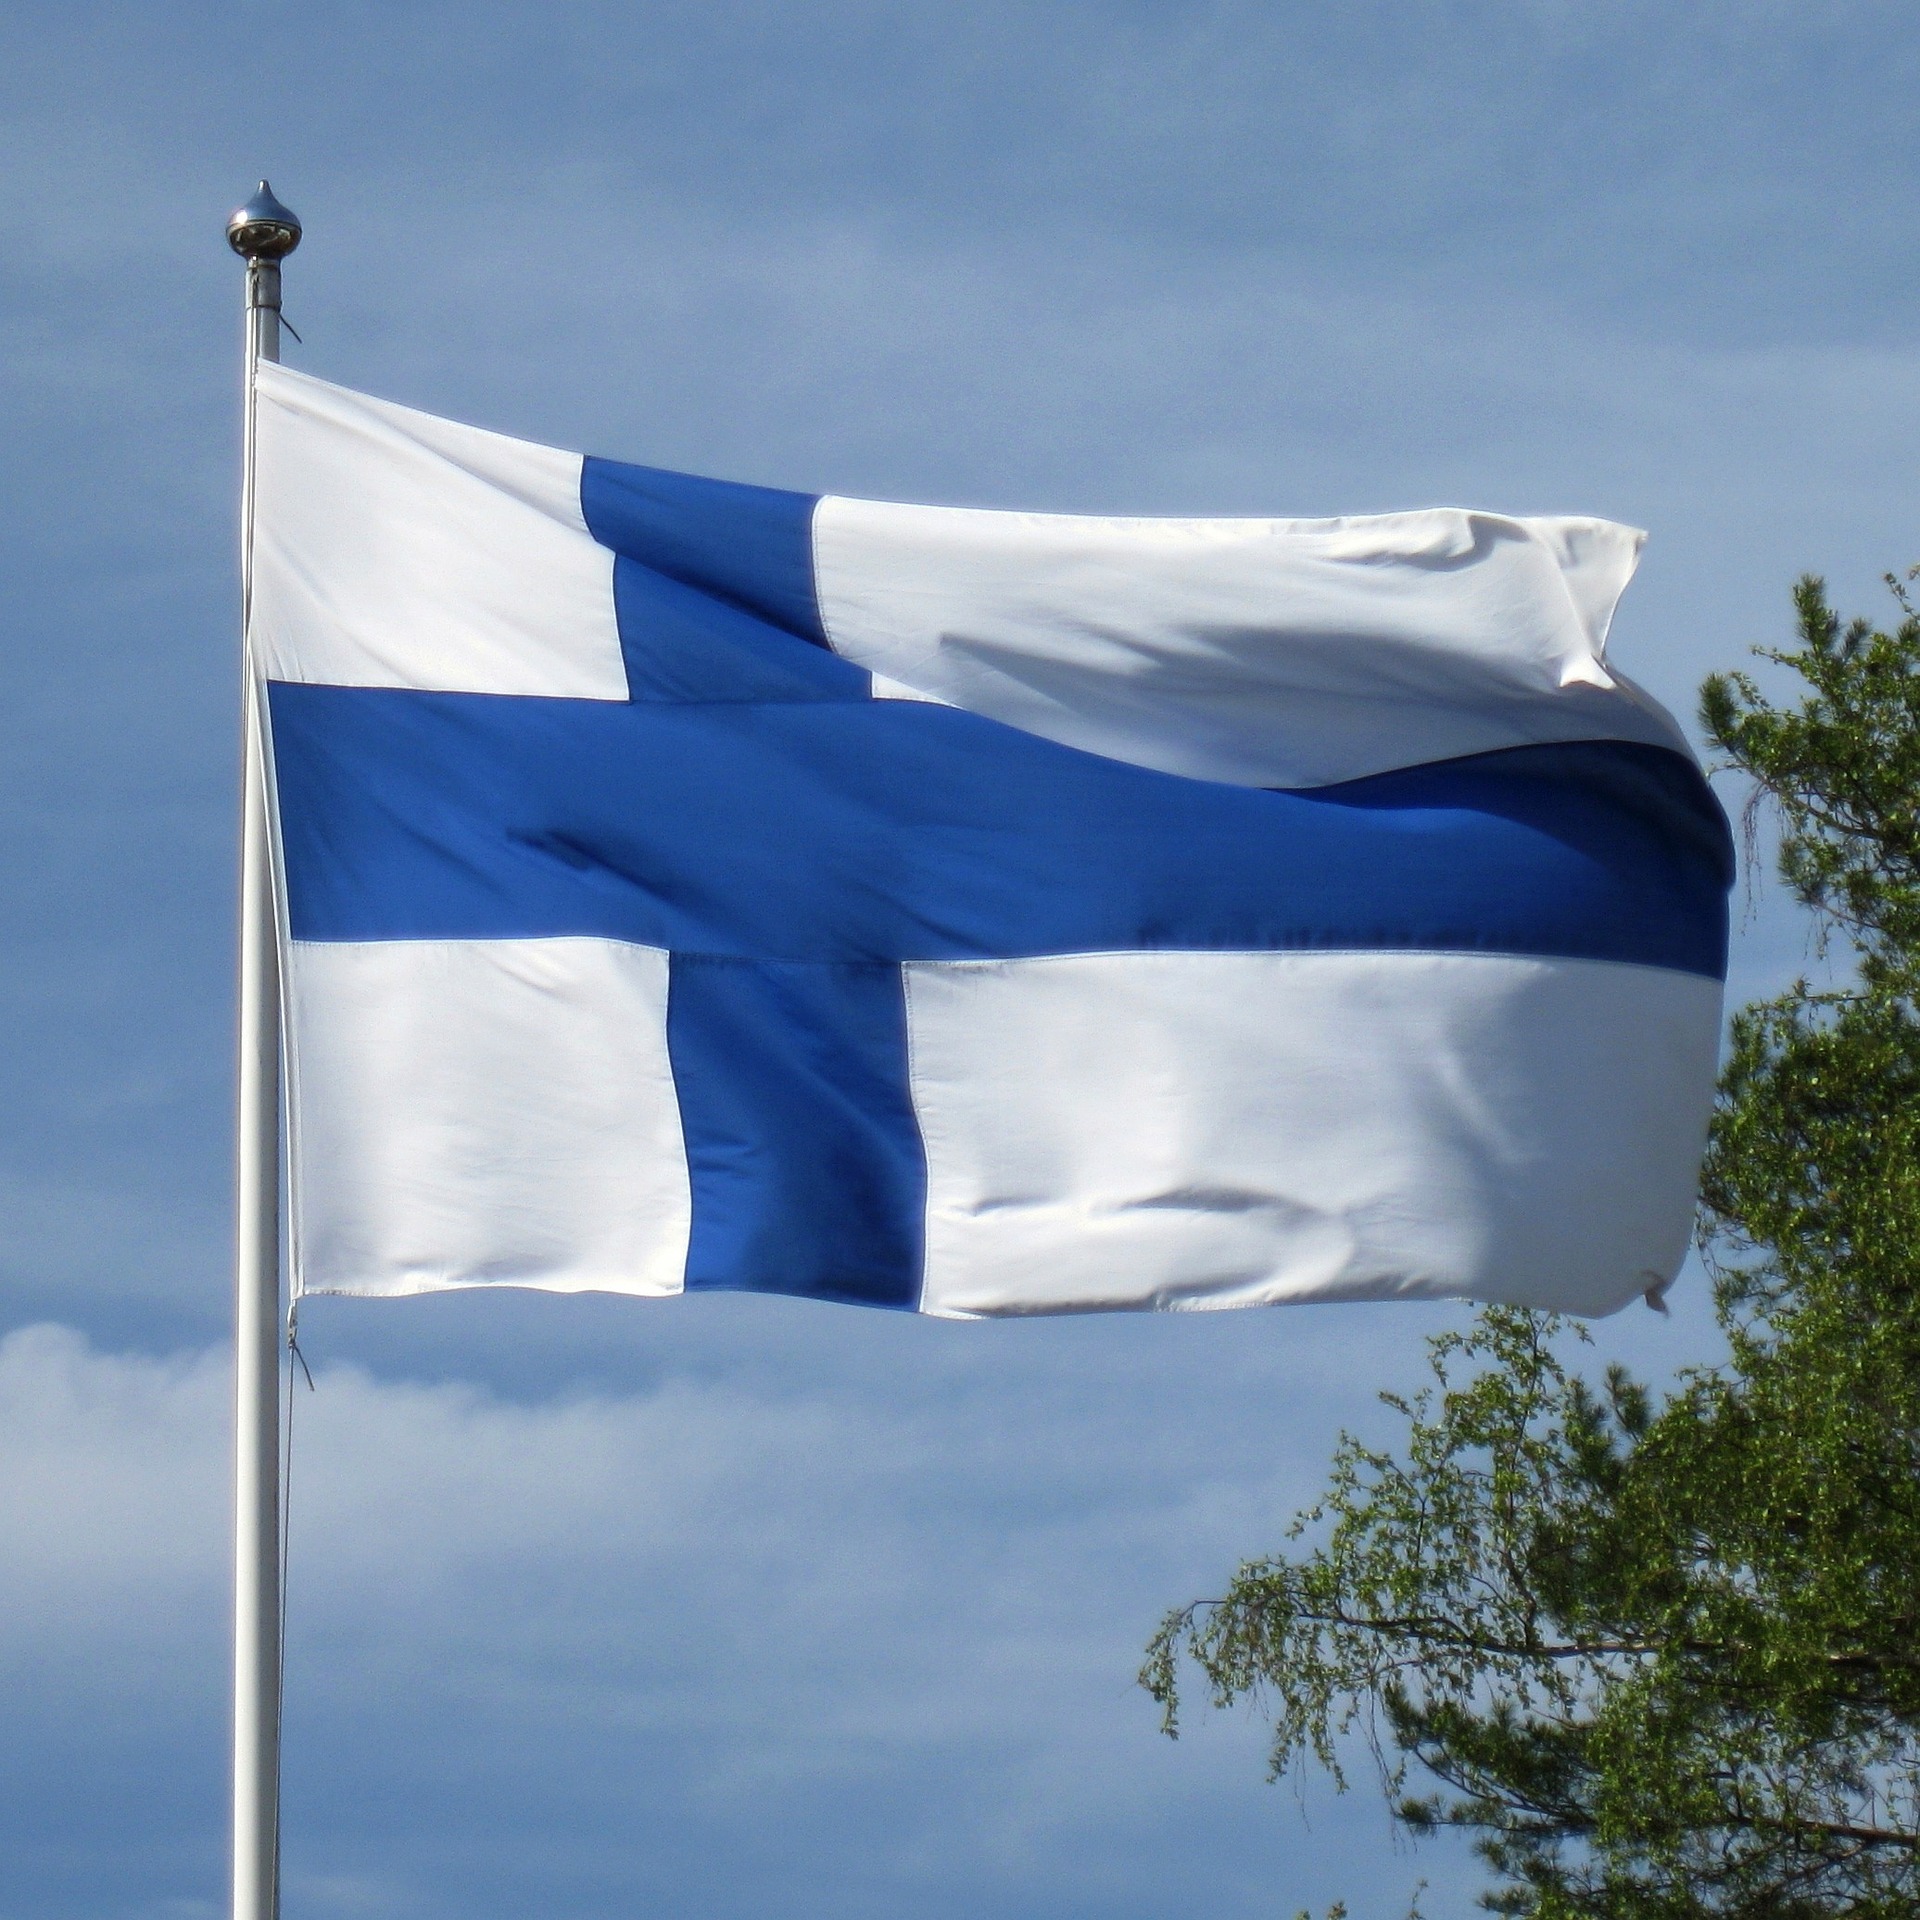 flag-of-finland-123273_1920